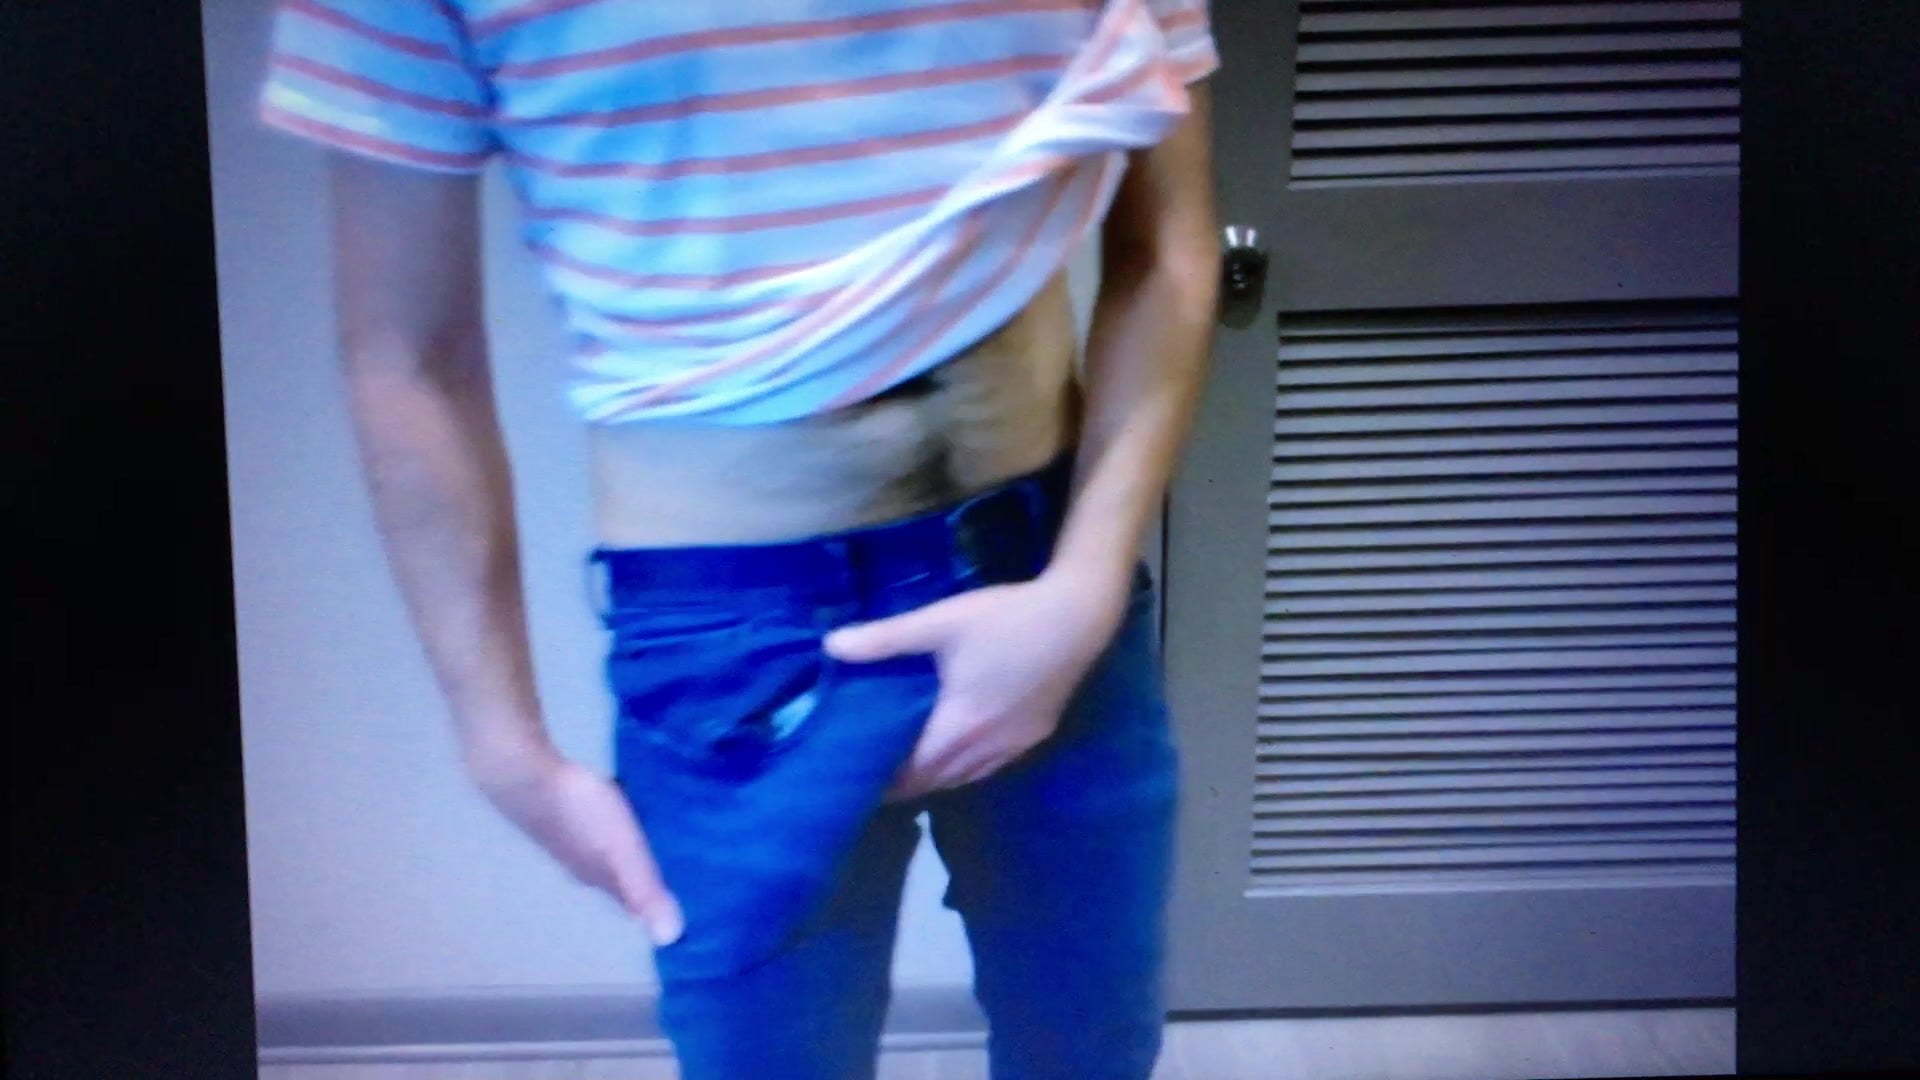 Huge Cock Coming Out Of Jeans